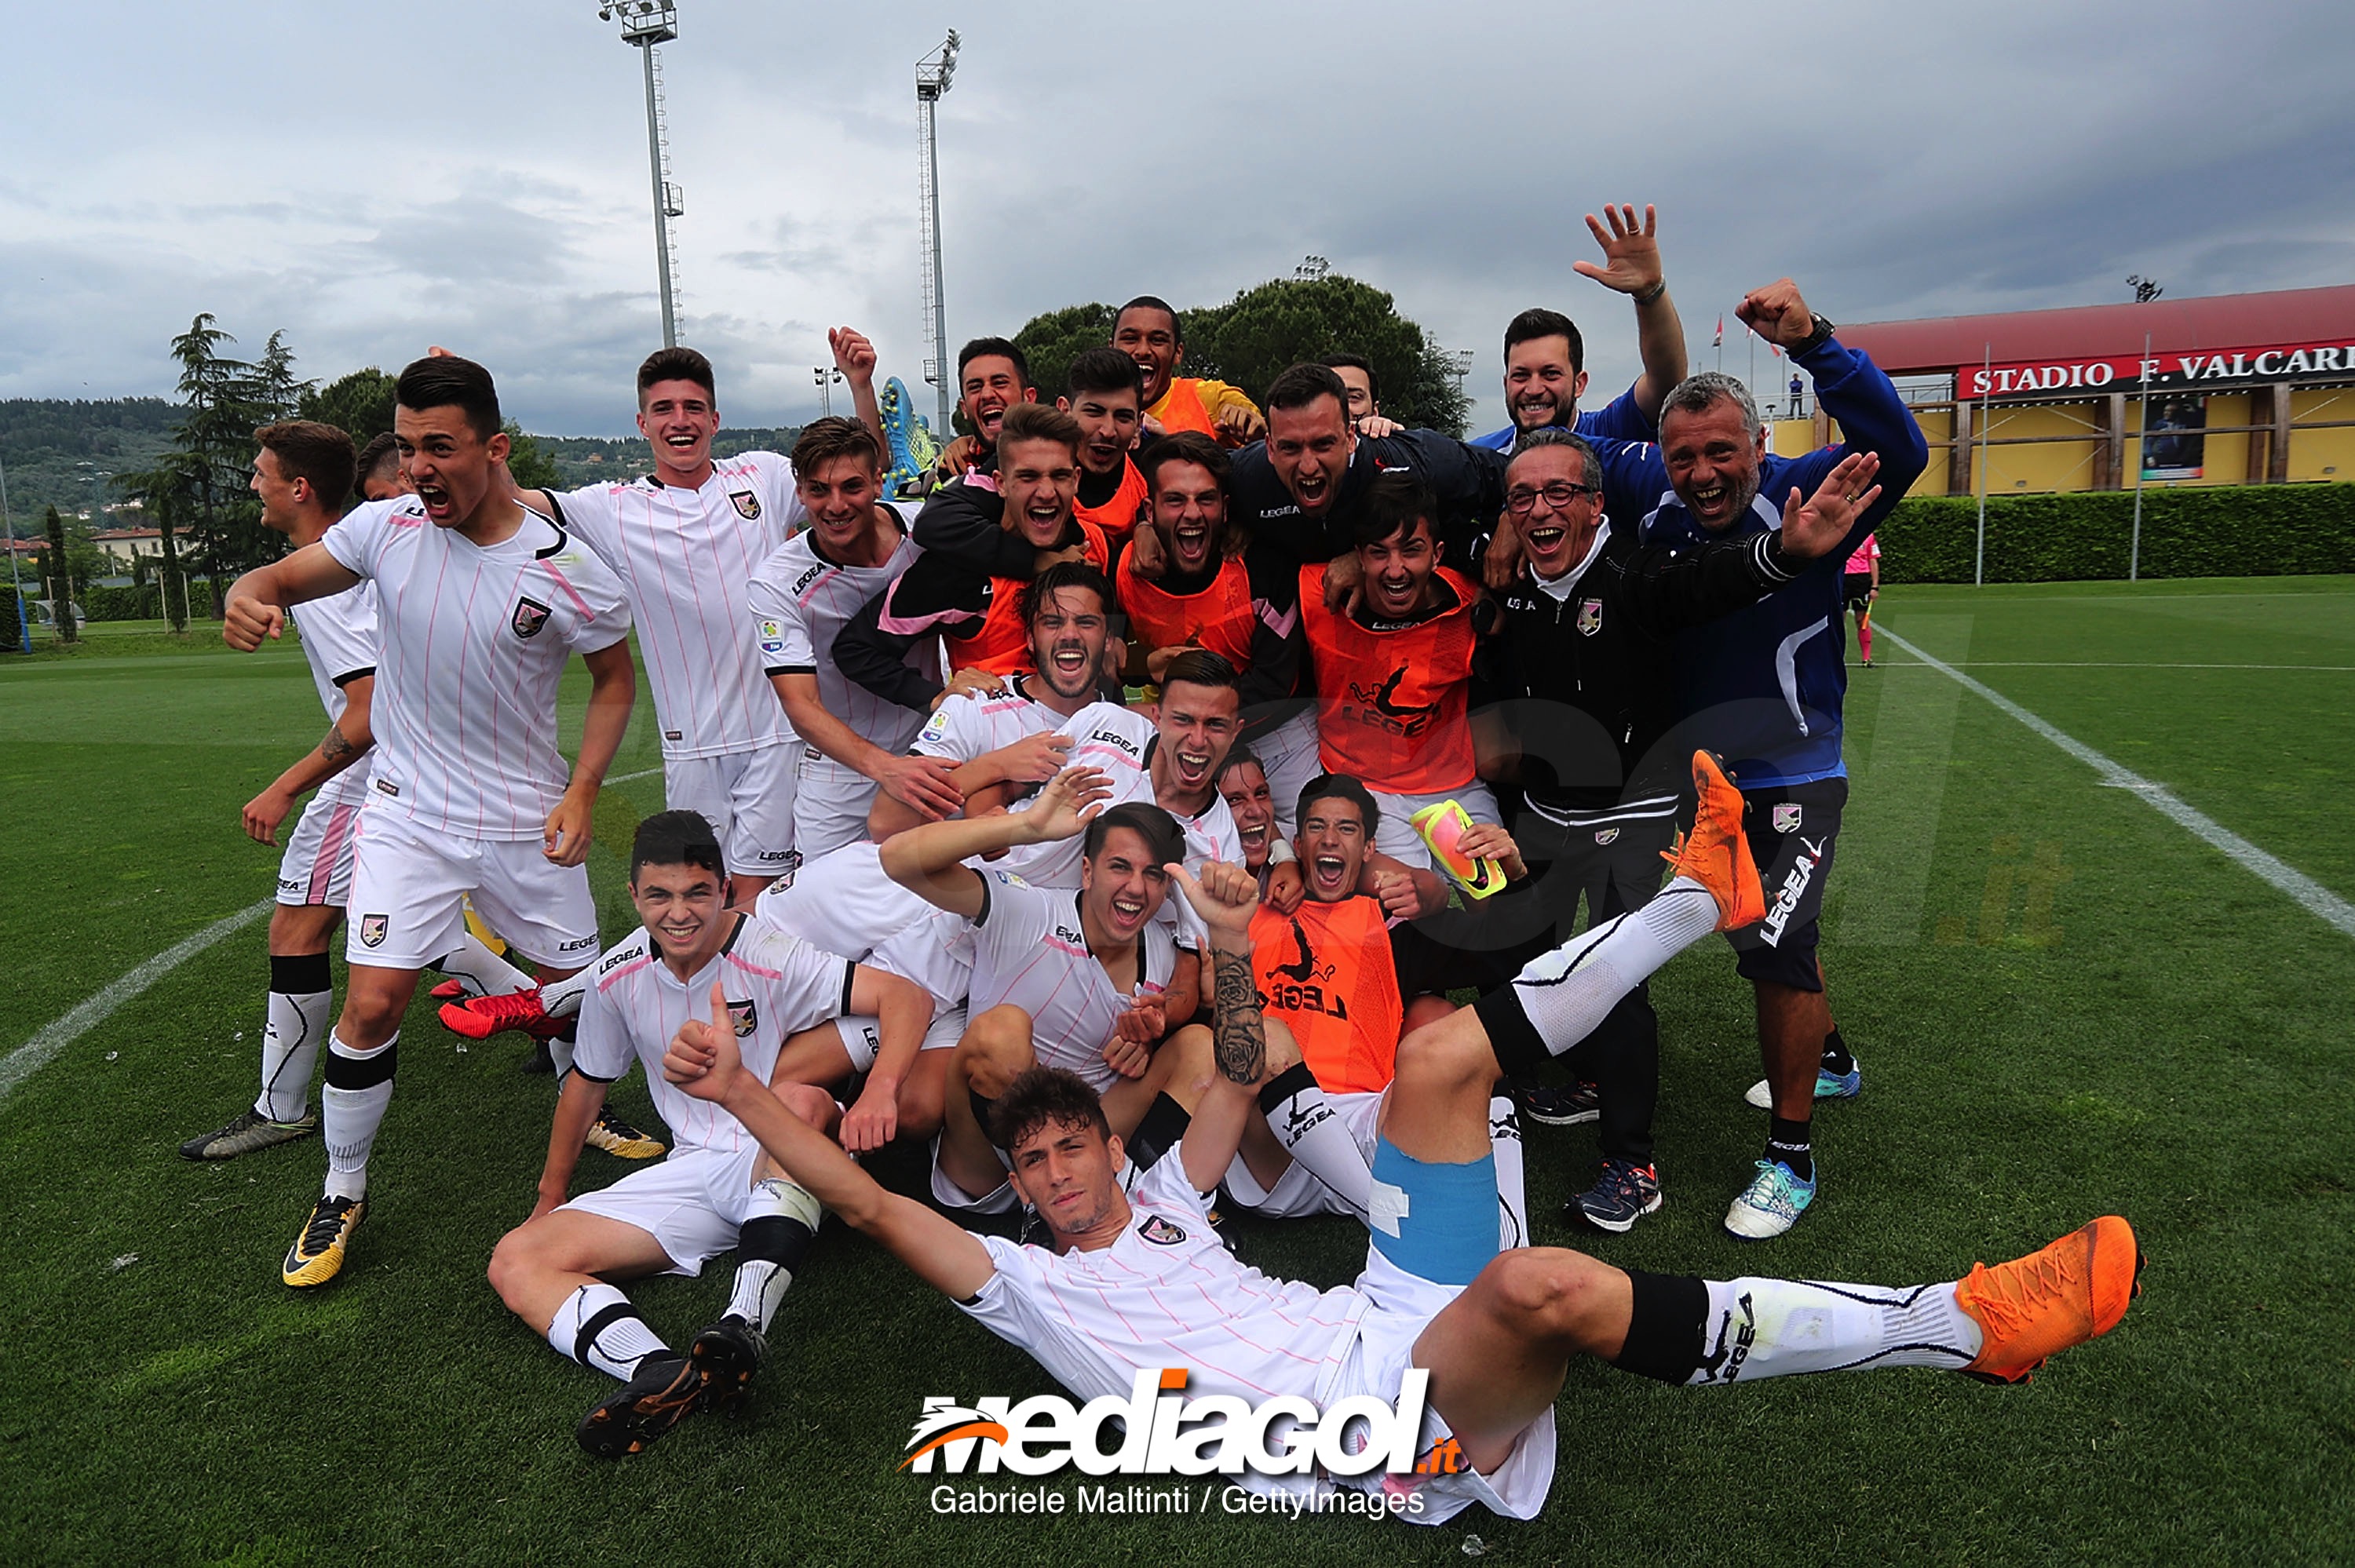 FLORENCE, ITALY - MAY 16: Players of US Citta' di Palermo U19 celebrate the victory during the SuperCoppa primavera 2 match between Novara U19 and US Citta di Palermo U19 at Centro Tecnico Federale di Coverciano on May 16, 2018 in Florence, Italy.  (Photo by Gabriele Maltinti/Getty Images)